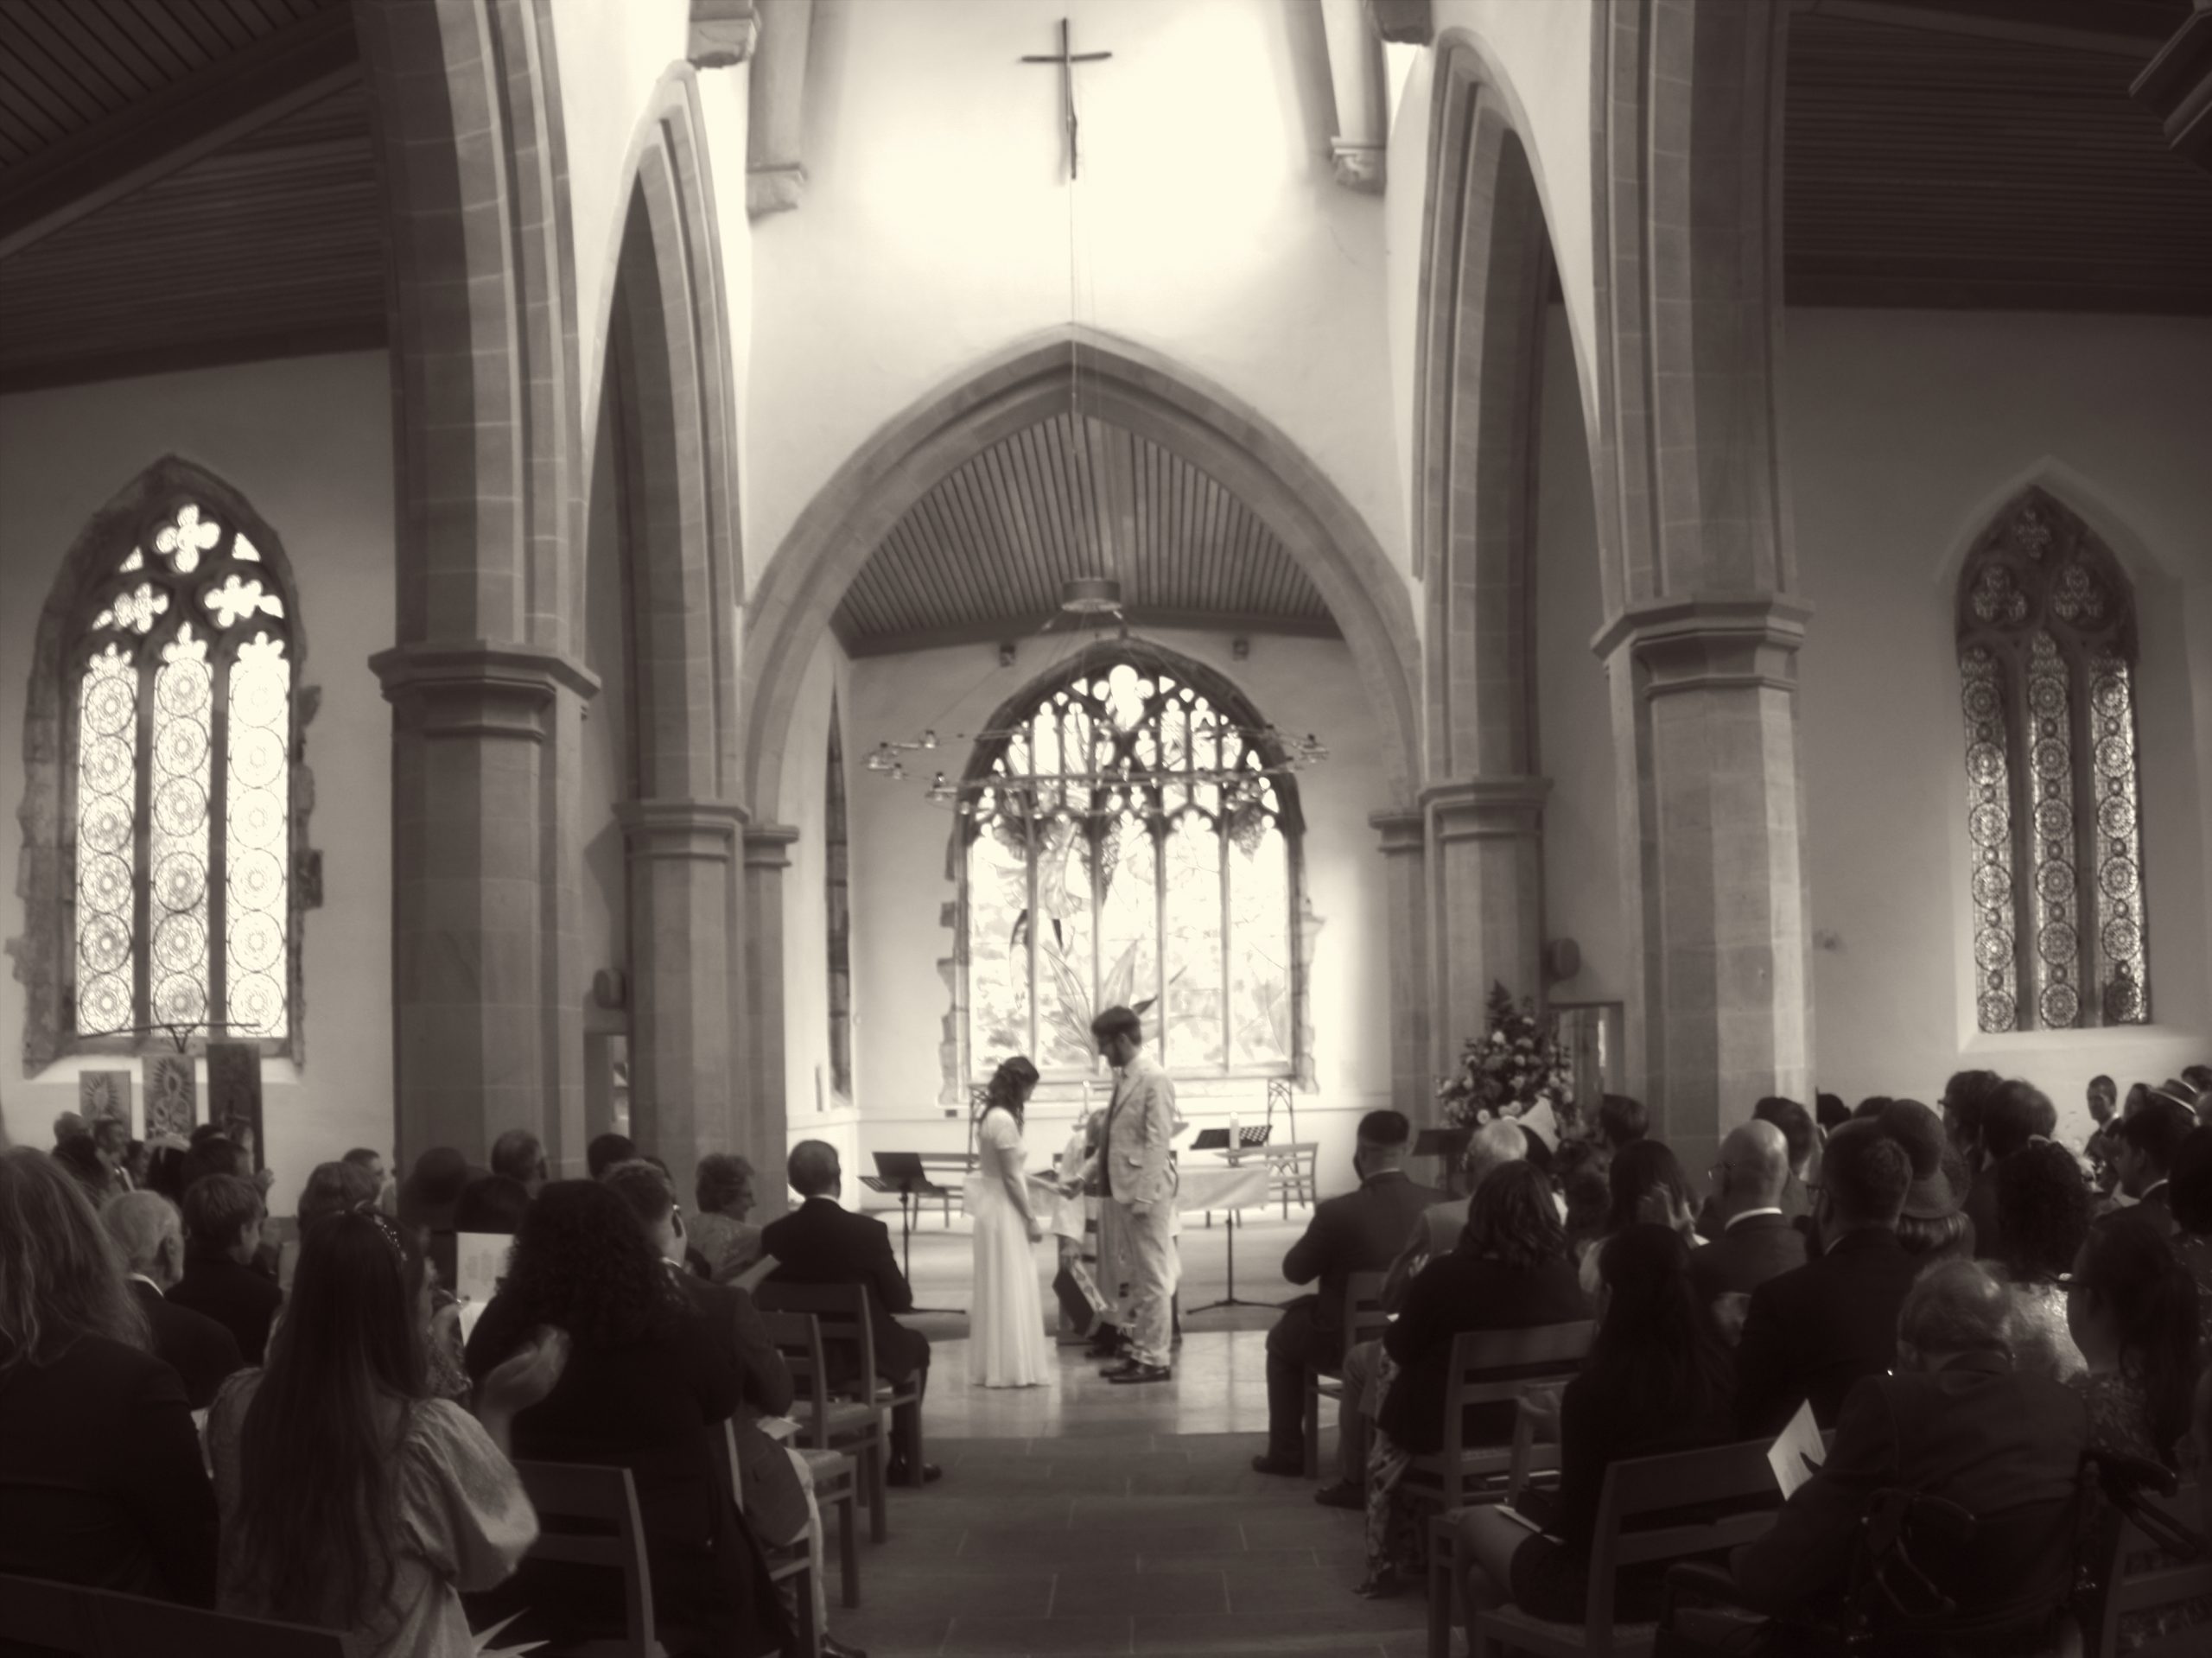 Charlotte's Wedding Photography Newcastle listed on Tie The Knot Wedding Directory